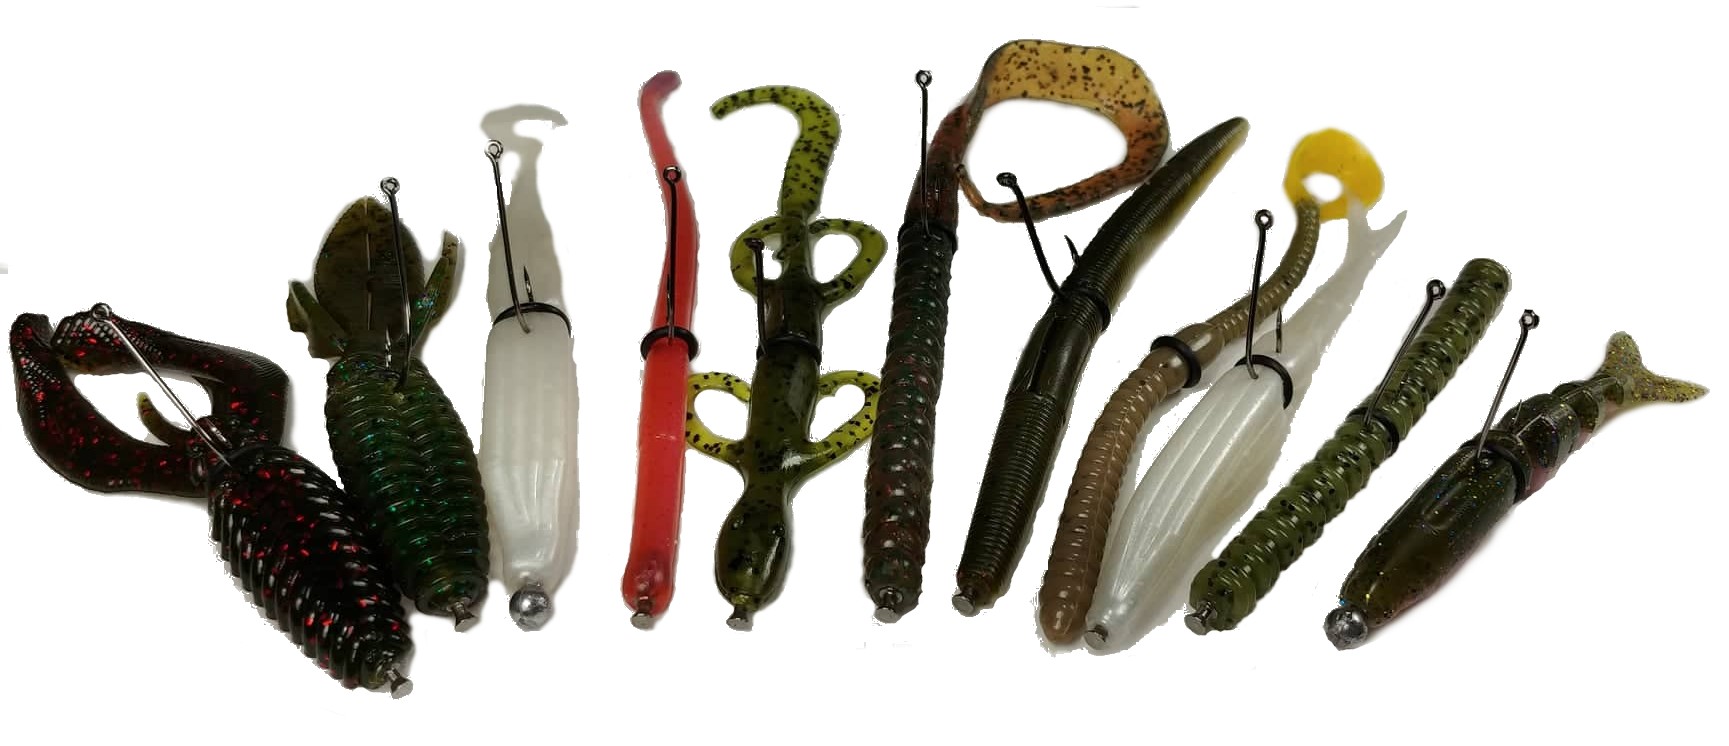 Color Is Junebug 20 Count of 7 Inch Ribbon Tail Bass Lure Bass Baits